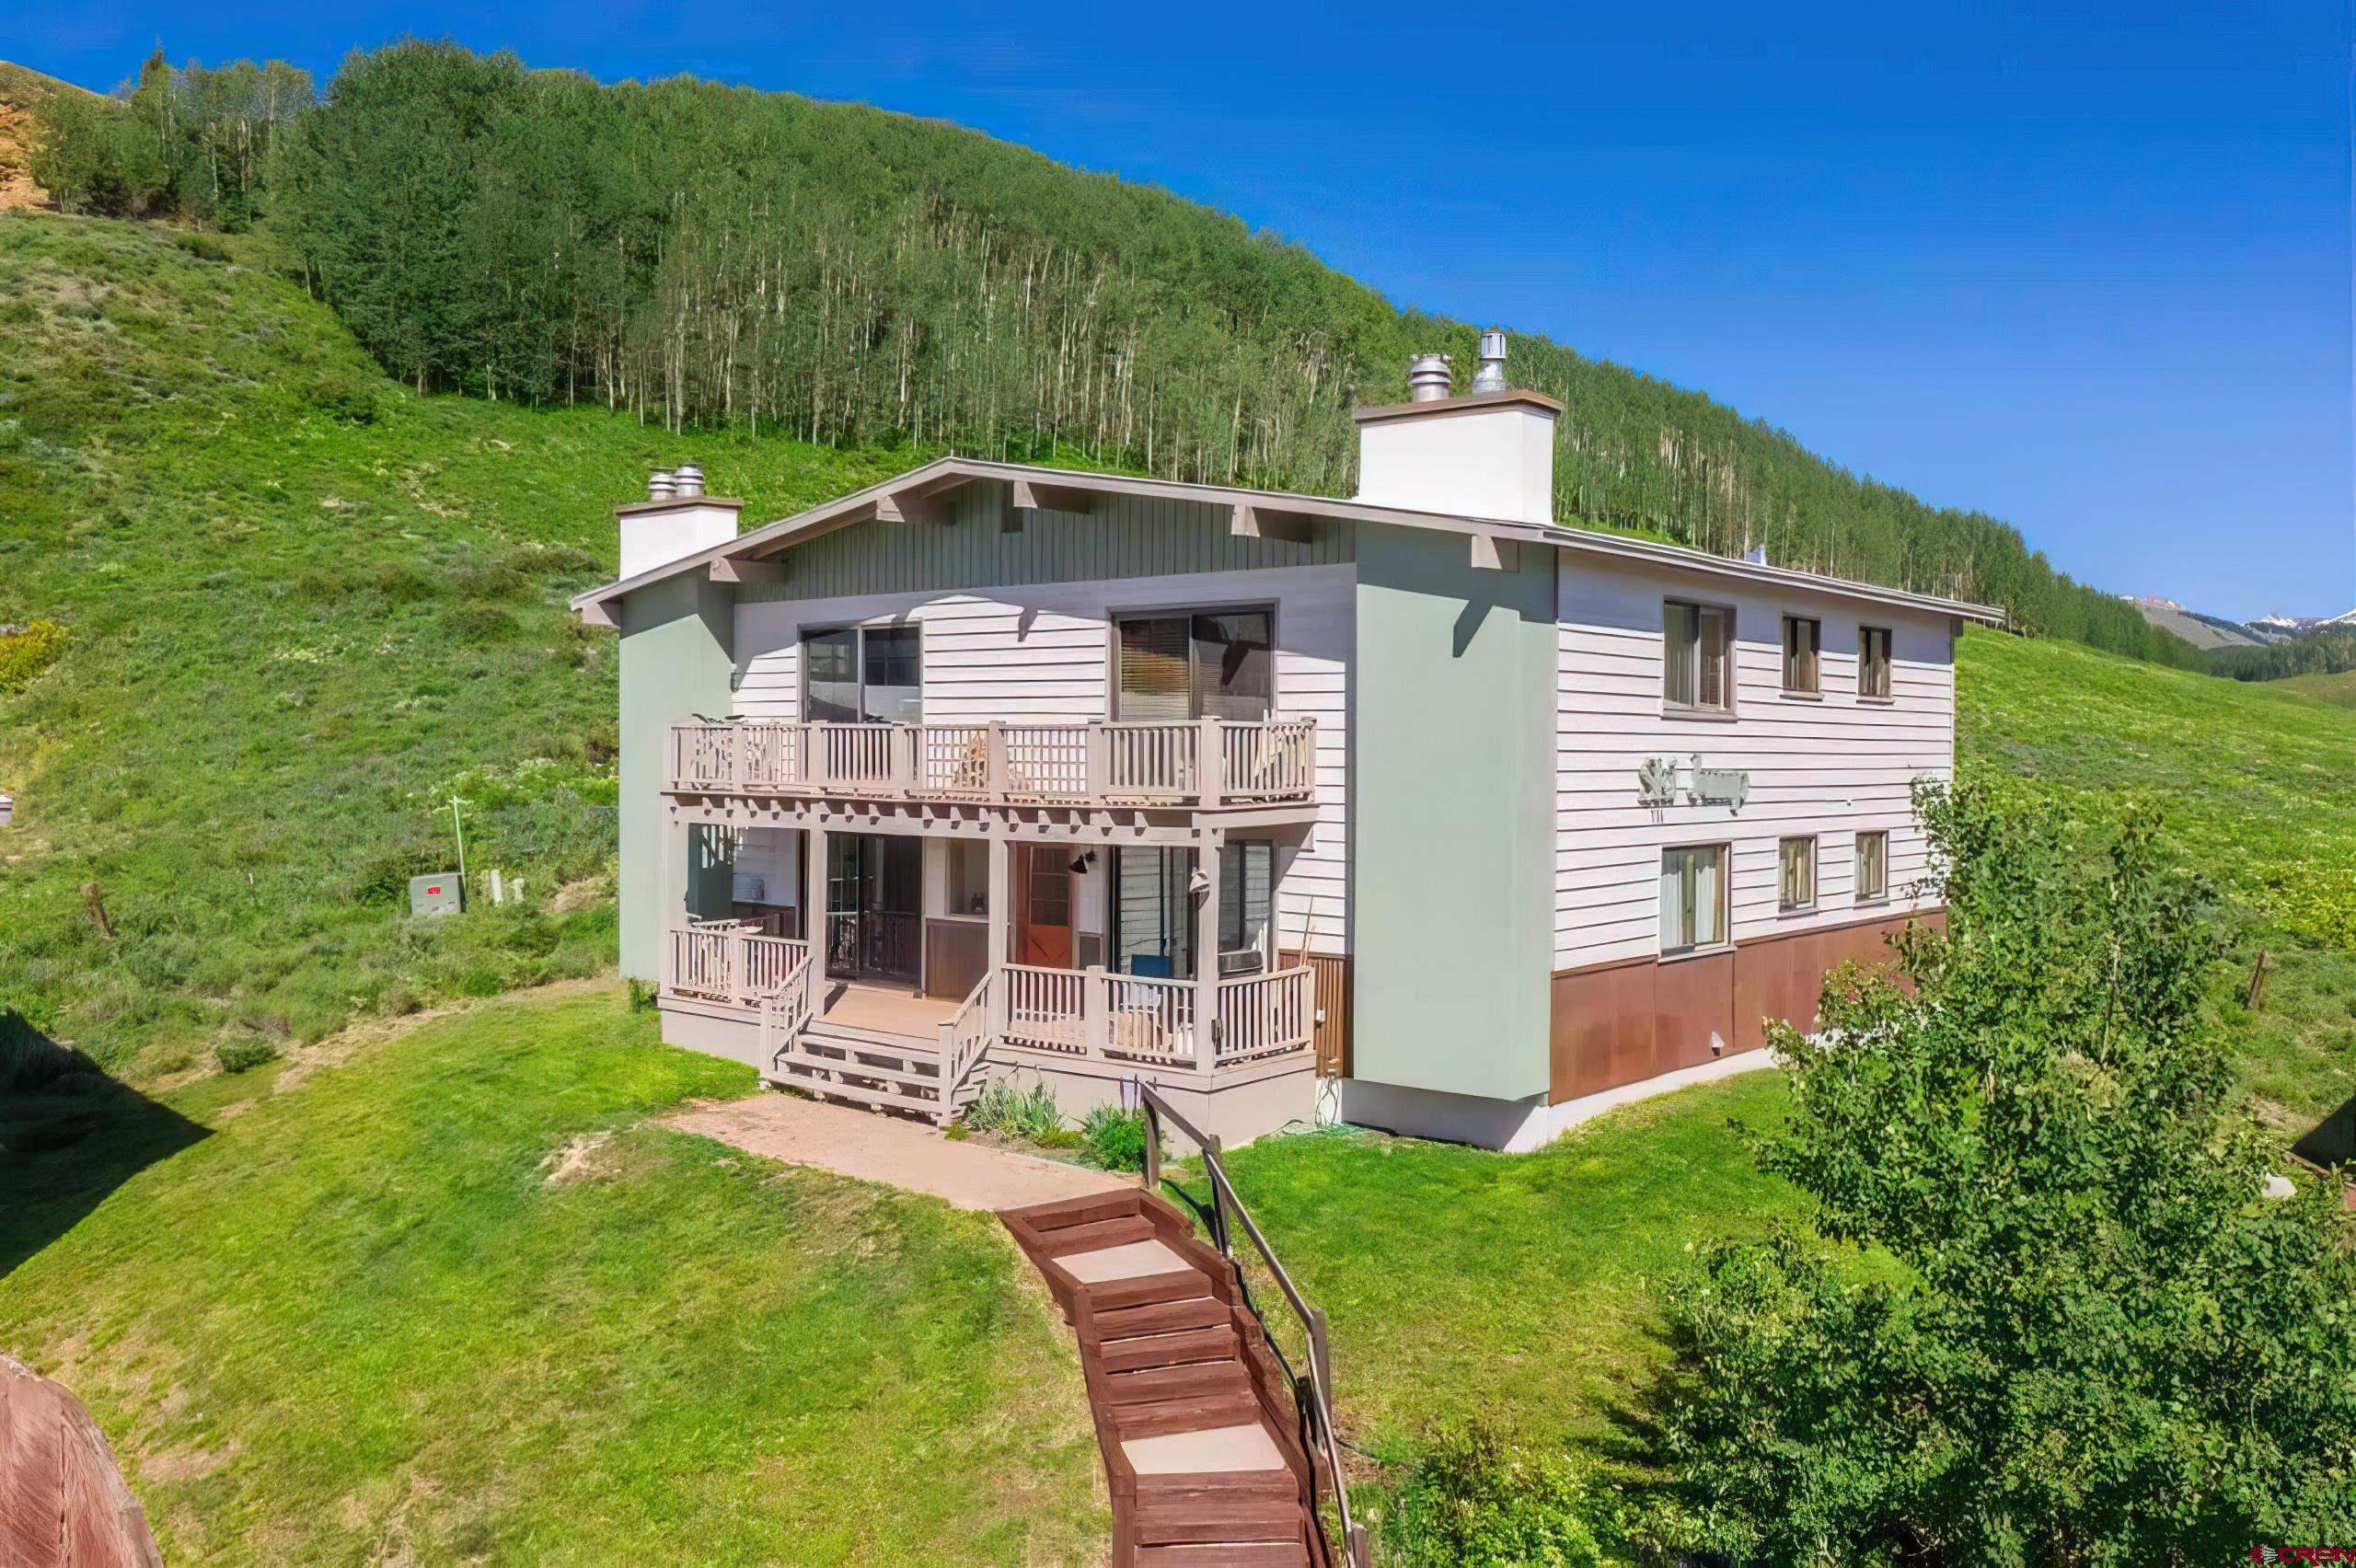 755 Gothic Road, Mt. Crested Butte, CO 81225